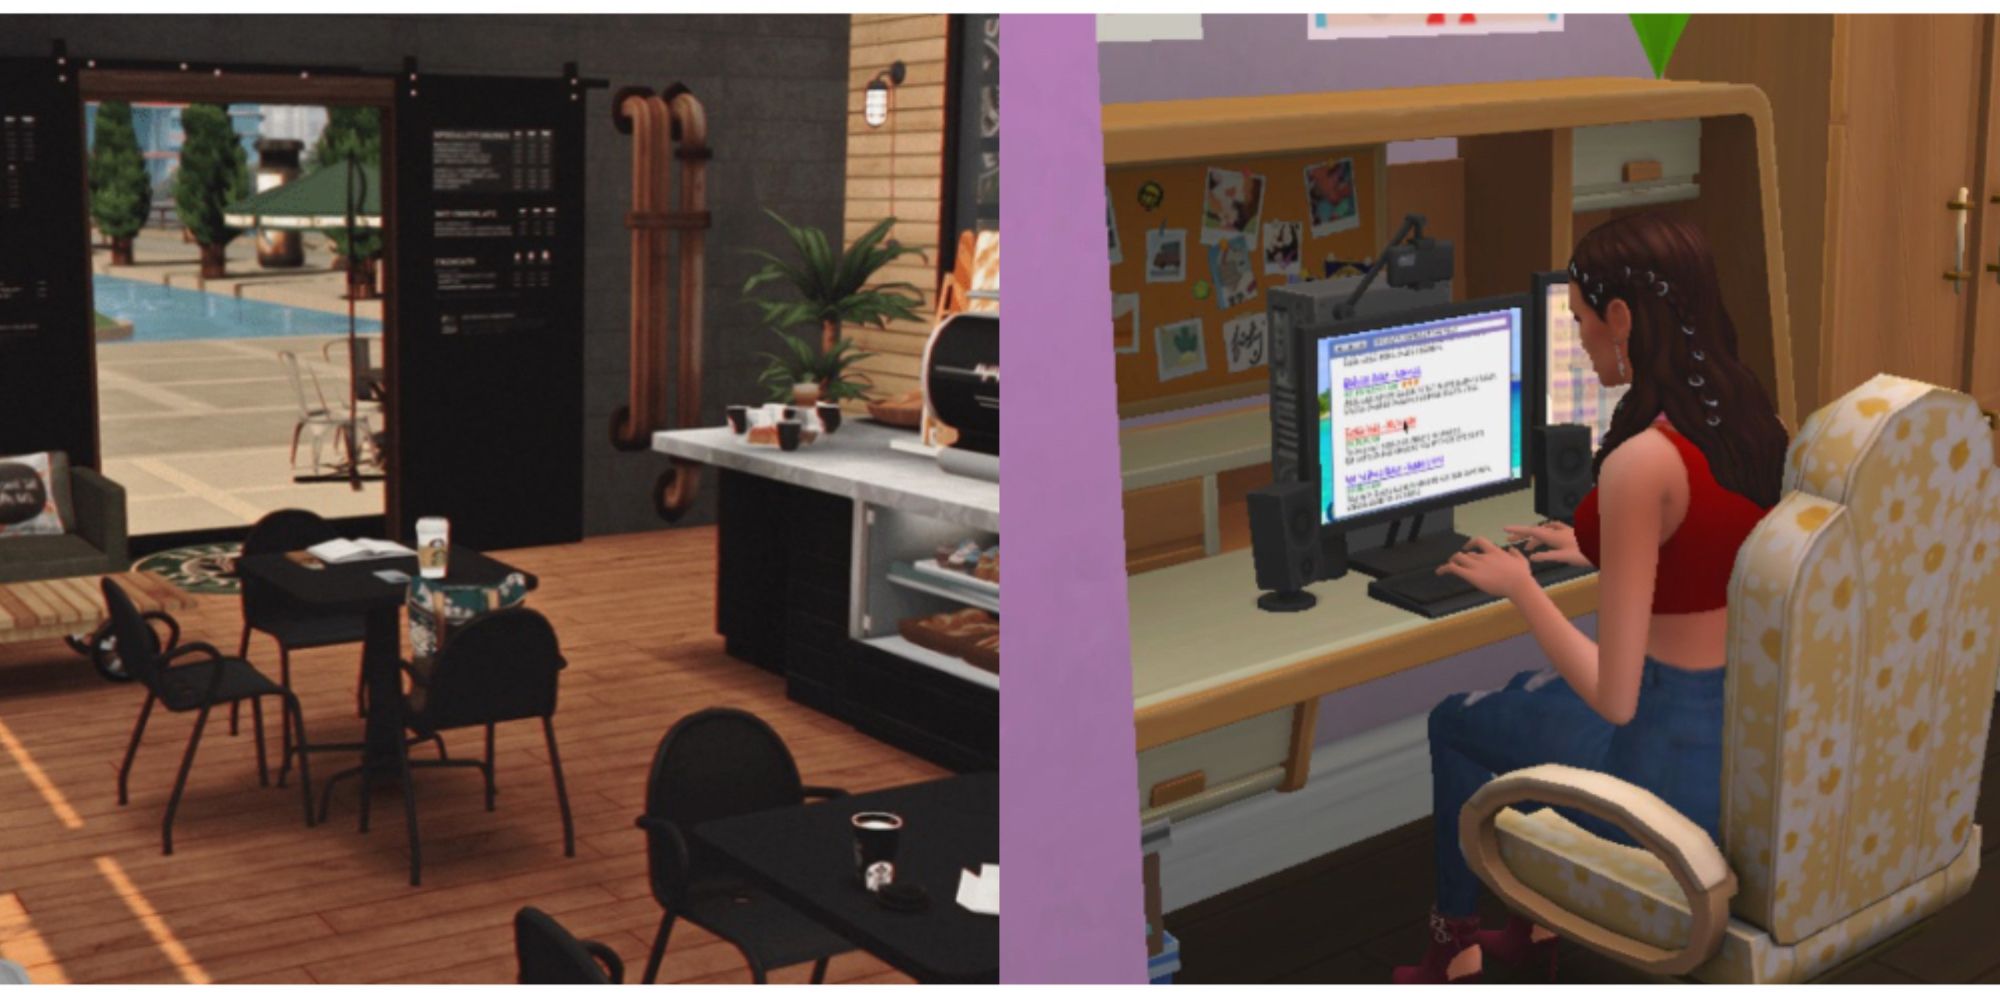 split image of a coffee shop and a Simfluencer in The Sims 4